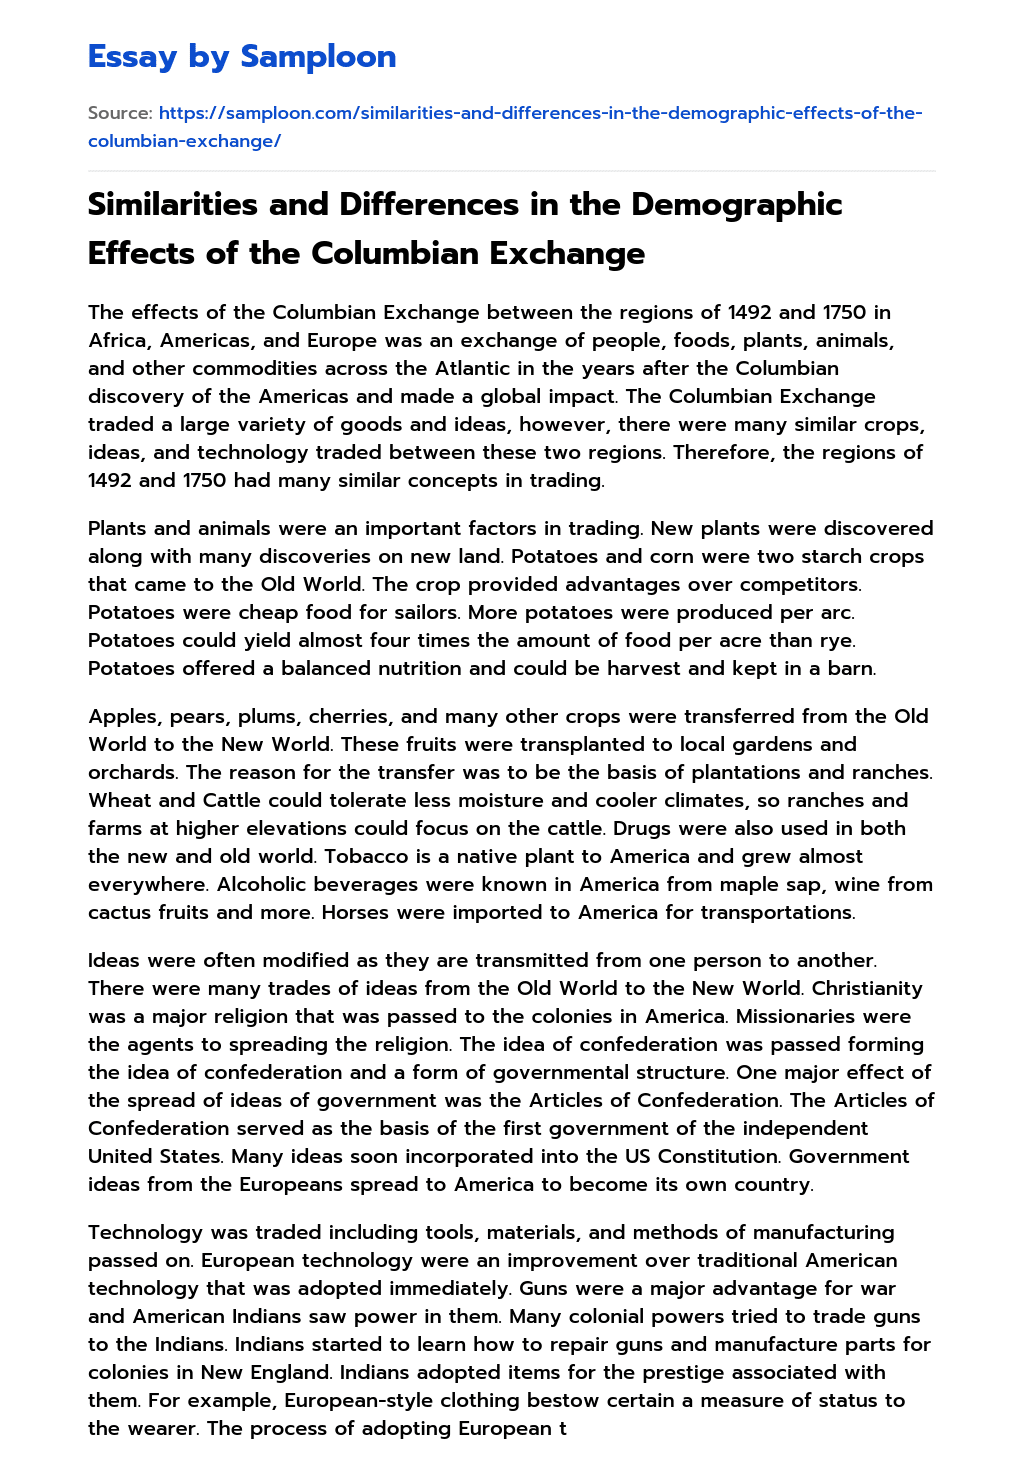 Similarities and Differences in the Demographic Effects of the Columbian Exchange essay